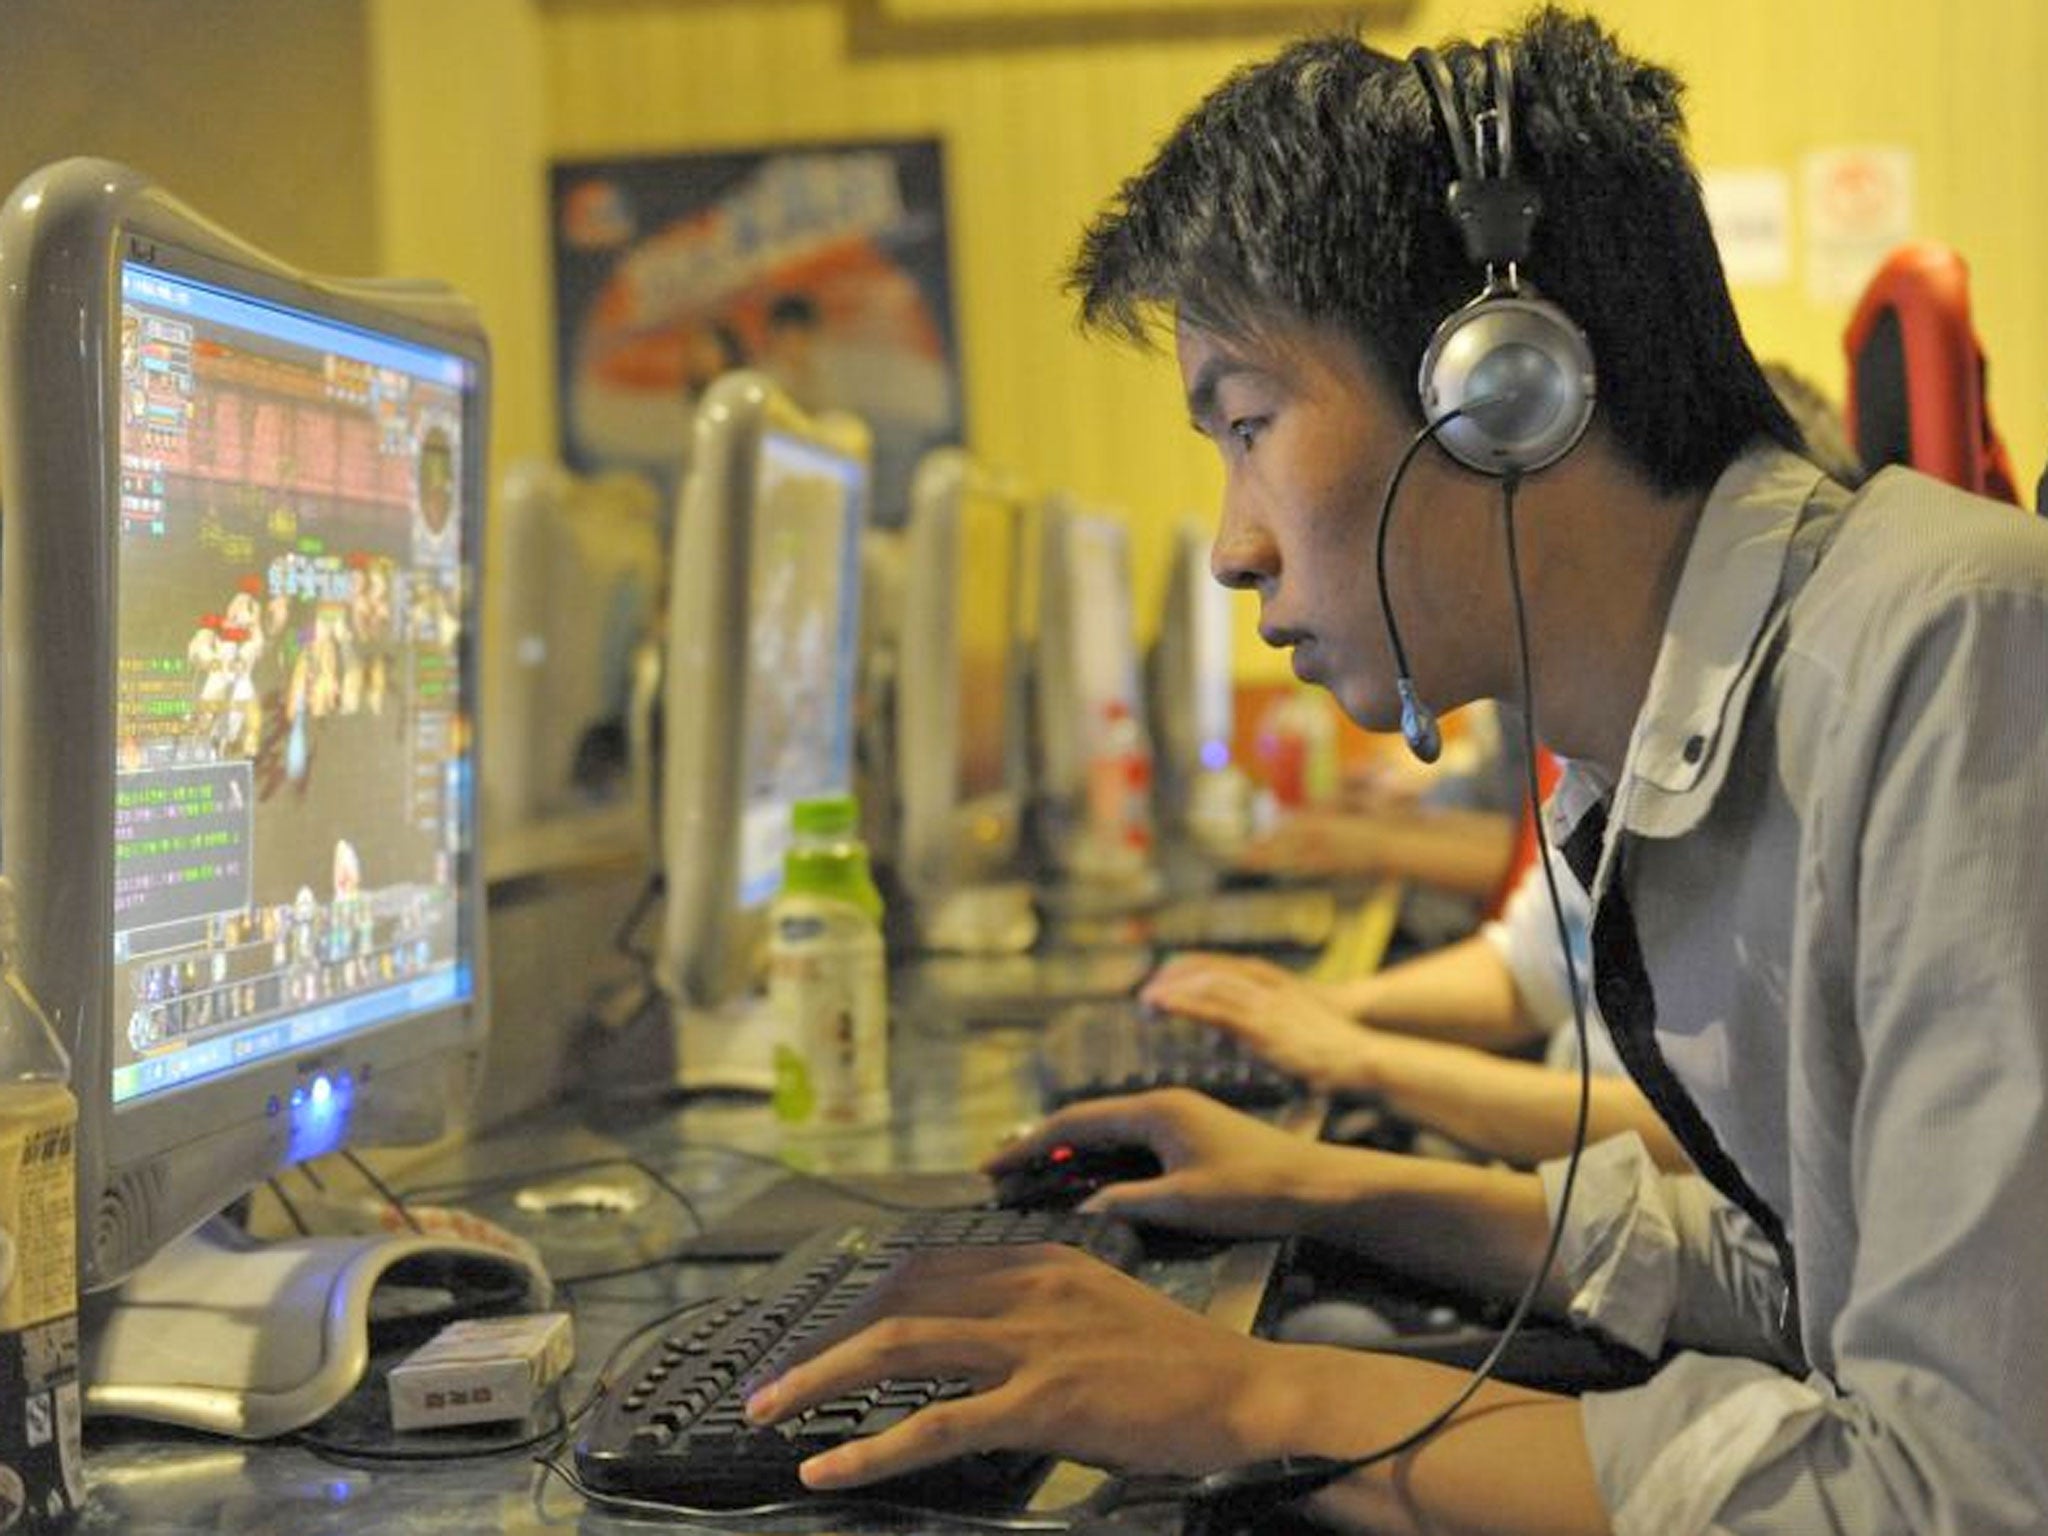 Some 120 million Chinese play video games on computers and smartphones despite the ban